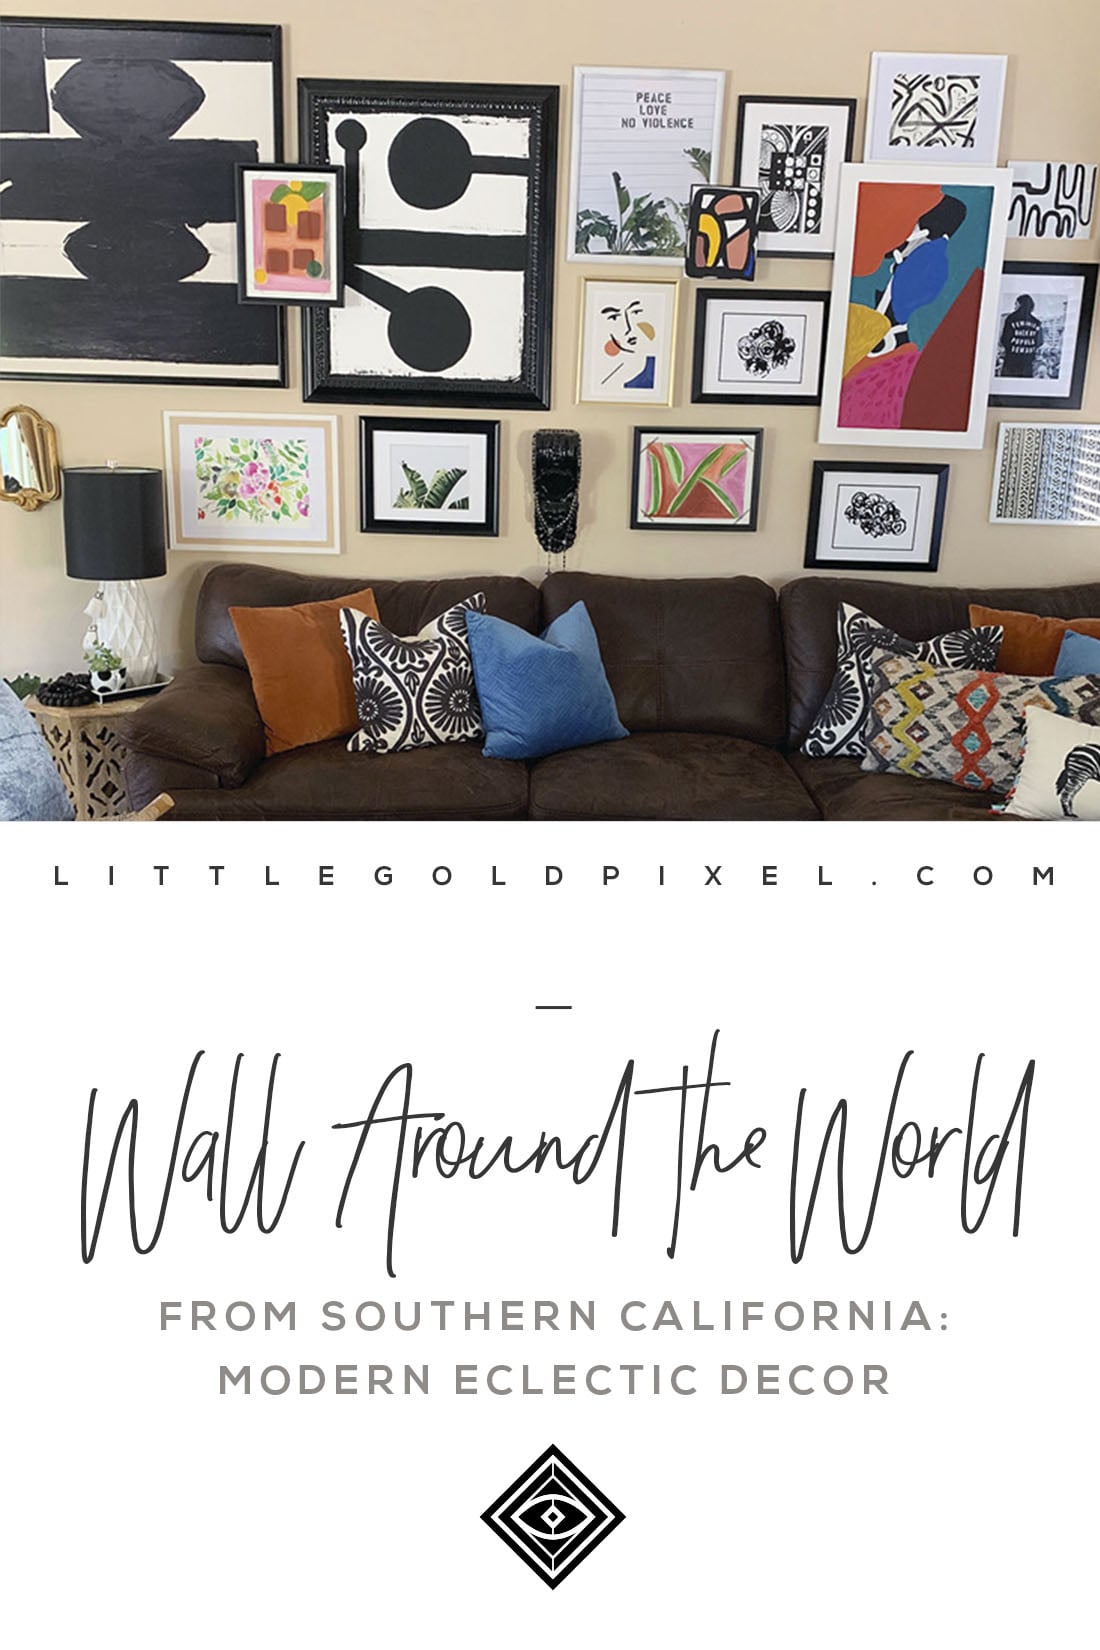 Wall Around the World: A Gallery Wall Series by Little Gold Pixel • Modern Eclectic Gallery Walls in Southern California • Photos © Jamie Skolnik